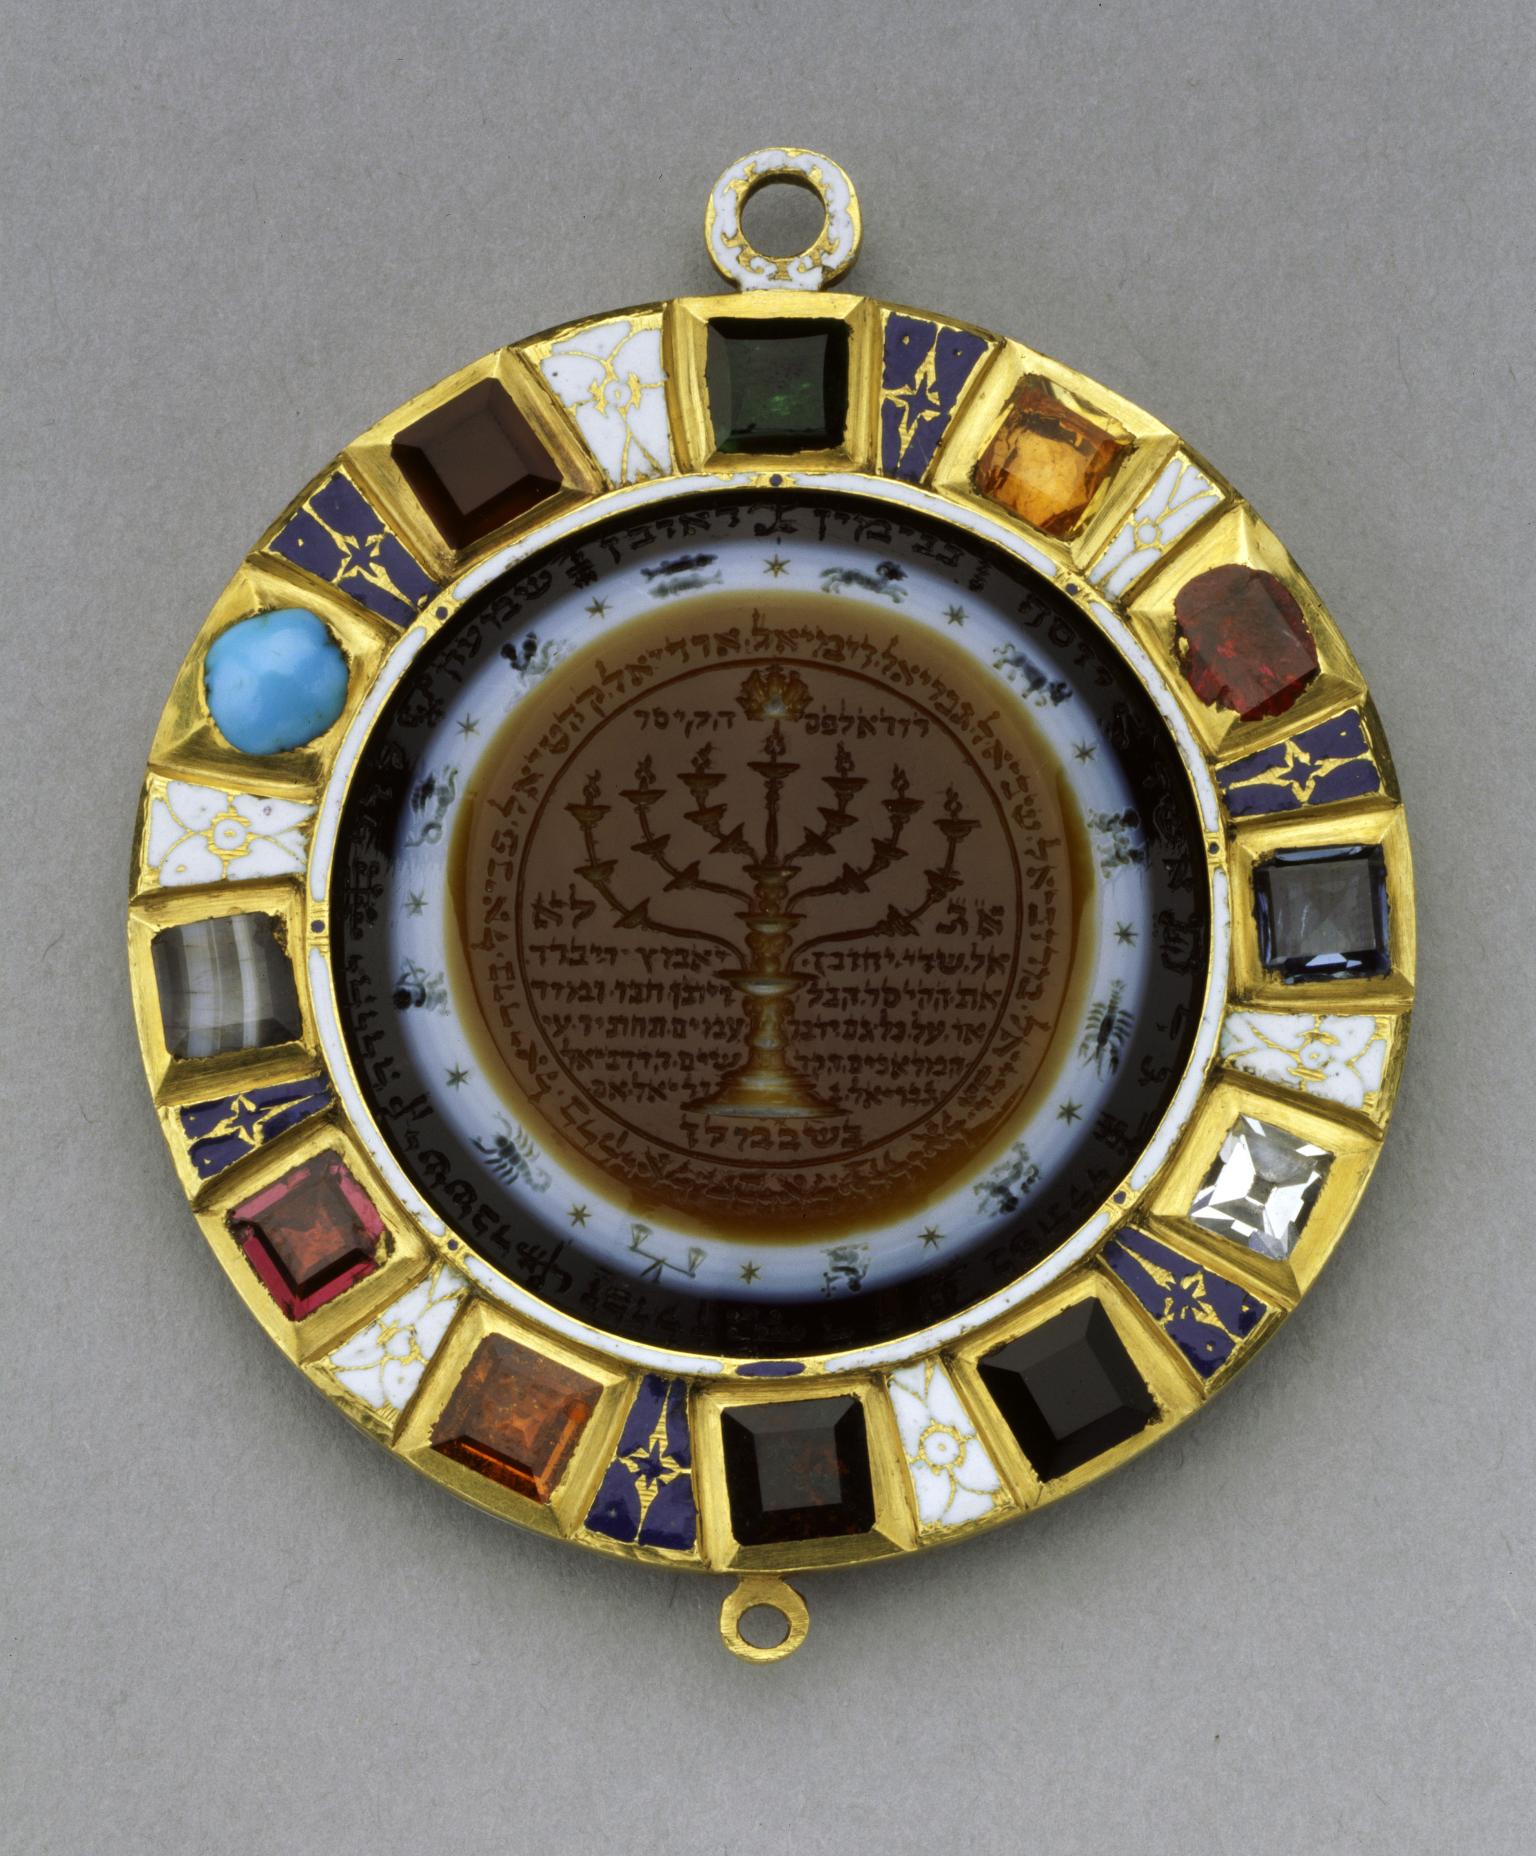 Circular amulet with stones around perimeter and image of candelabrum with Hebrew text in center, surrounded by images of the zodiac.